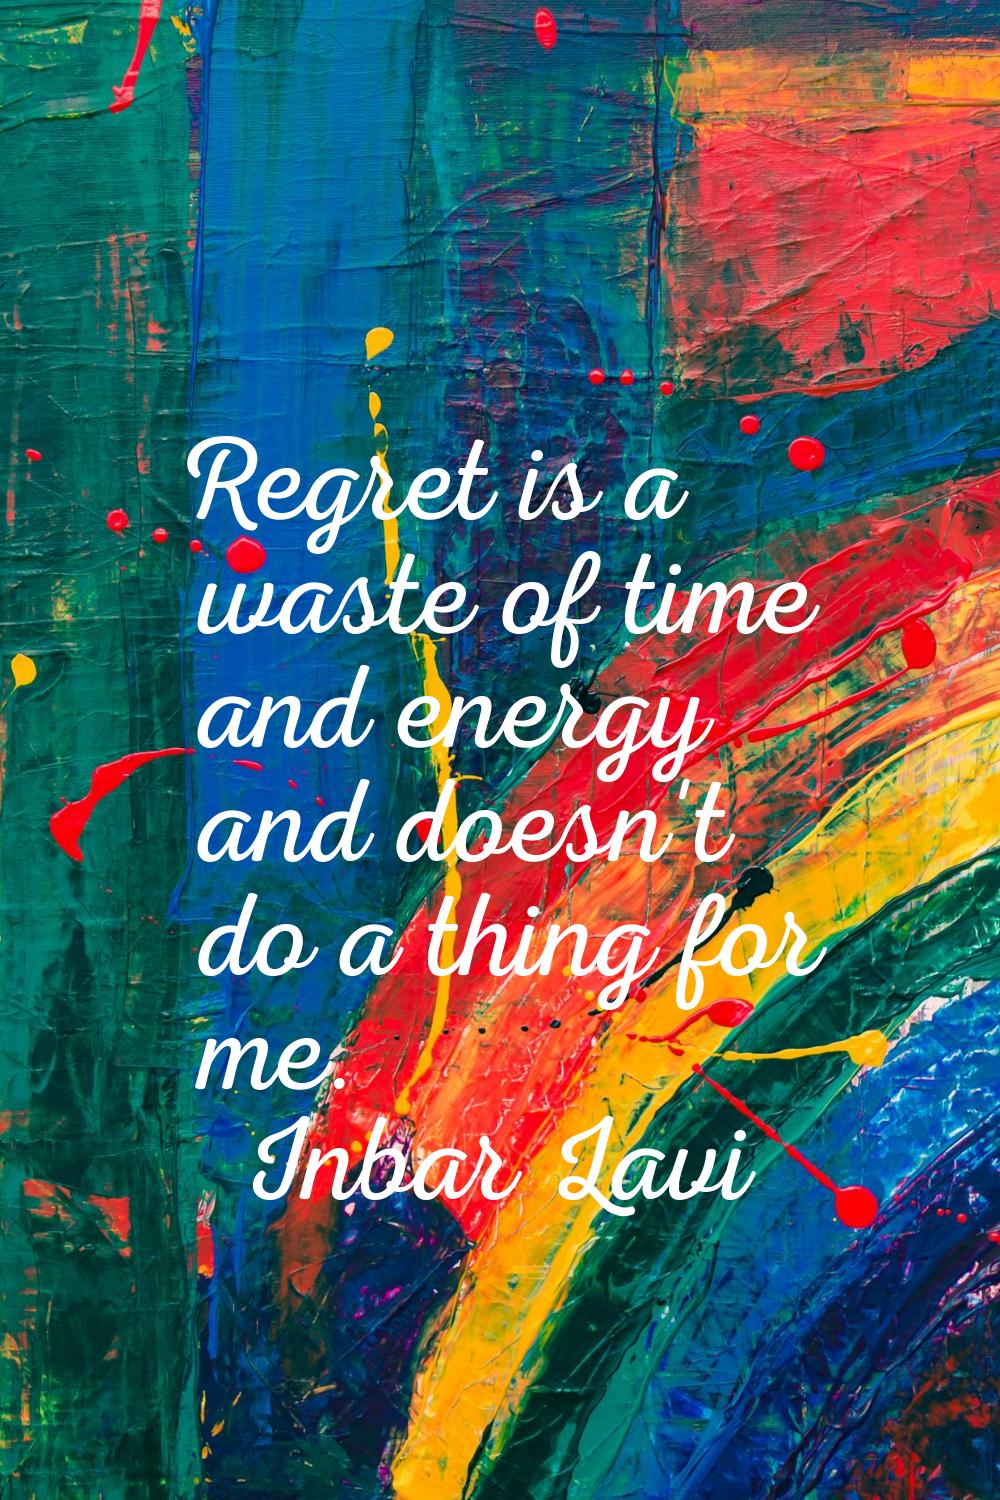 Regret is a waste of time and energy and doesn't do a thing for me.